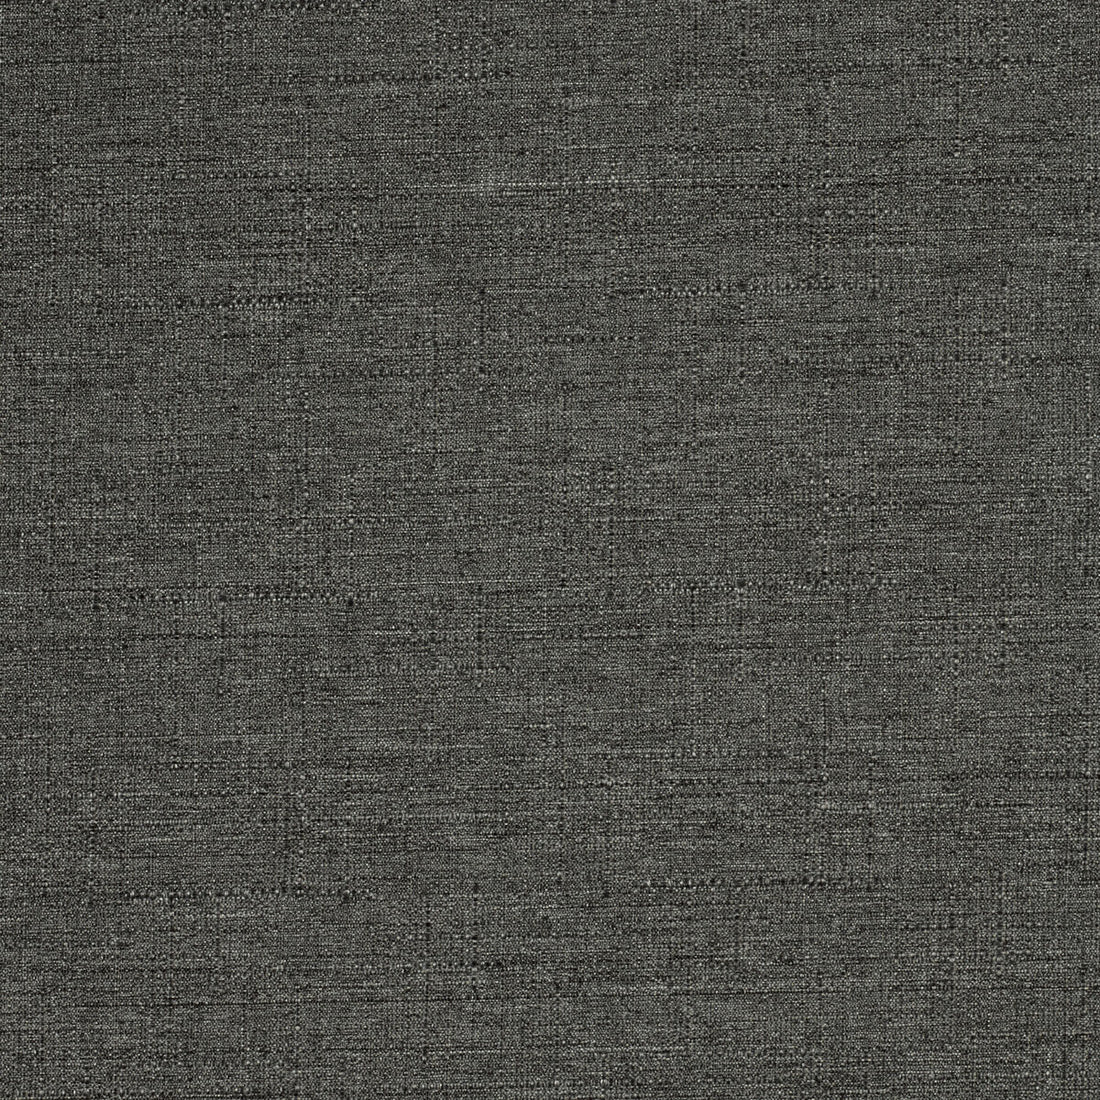 Kravet Contract fabric in 4321-21 color - pattern 4321.21.0 - by Kravet Contract